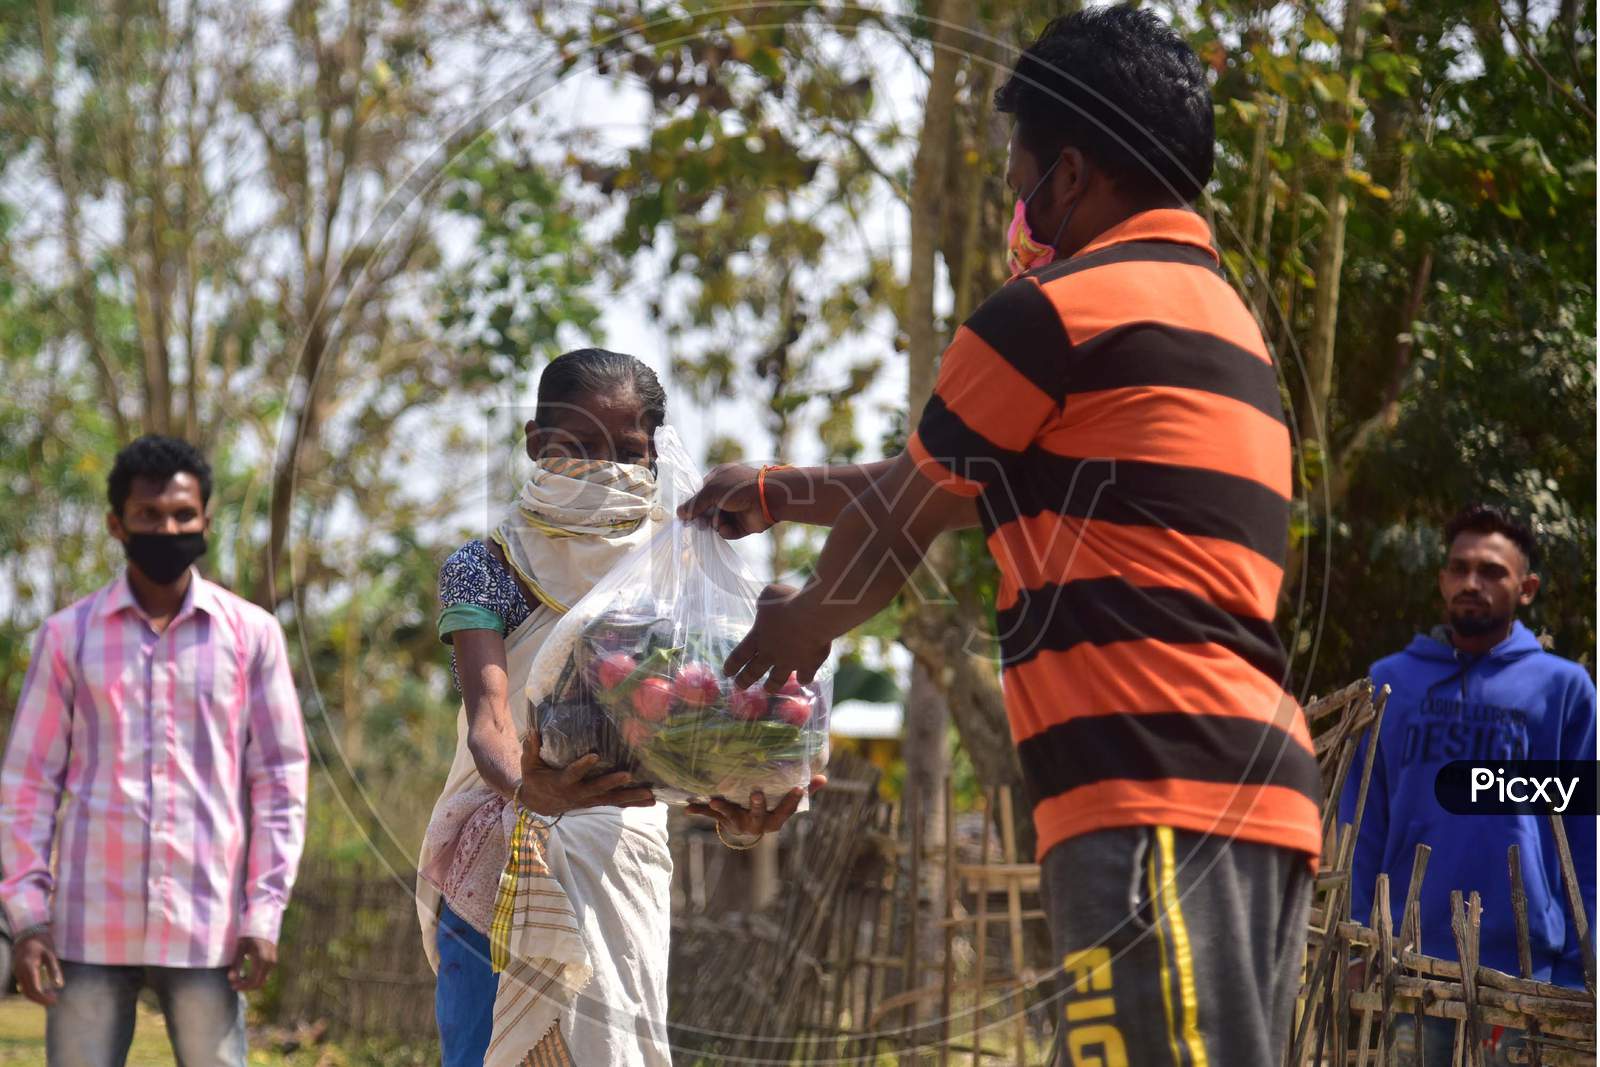 Volunteers  Distribute Ration Among Tea Tribe People During A Nationwide Lockdown Imposed In The Wake Of Coronavirus Pandemic At Samaguri In Nagaon District Of Assam